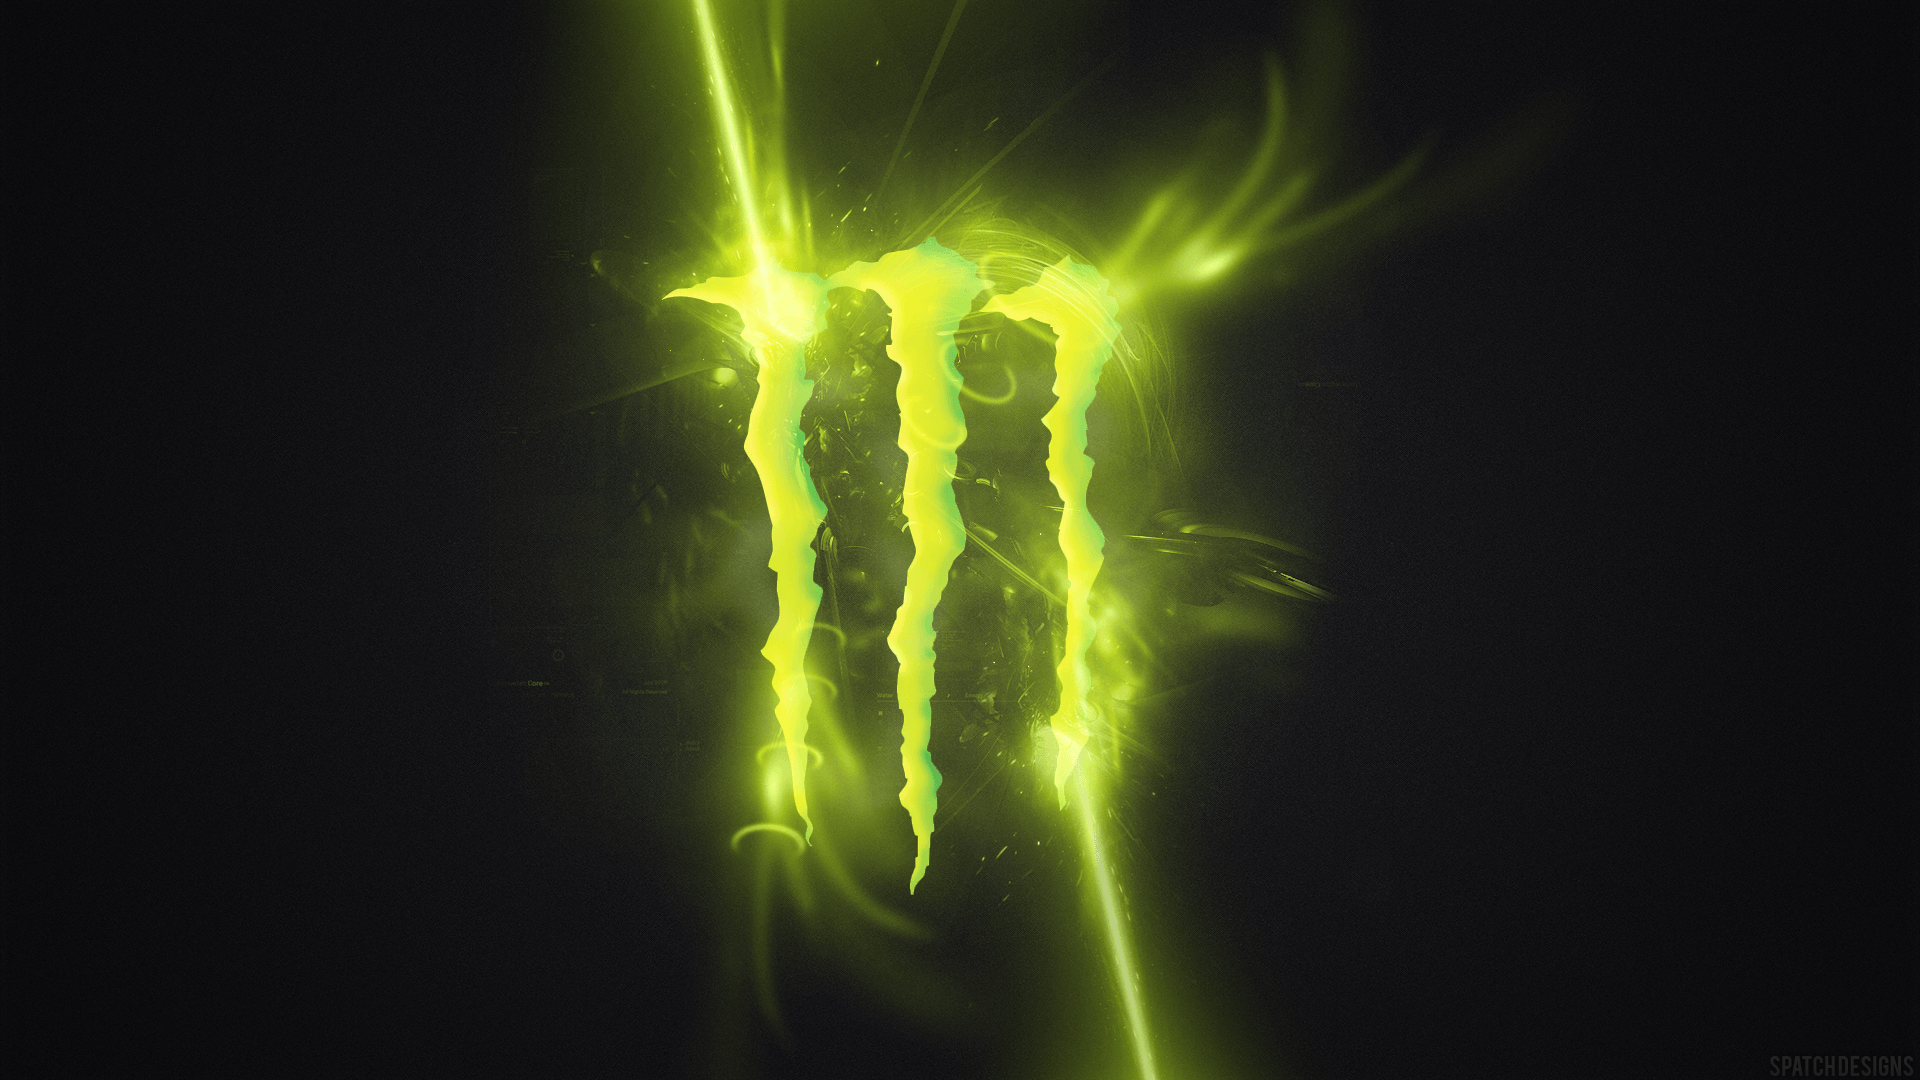 Beautiful Monster Energy Logo HD Wallpaper Picture Sharing. Dc